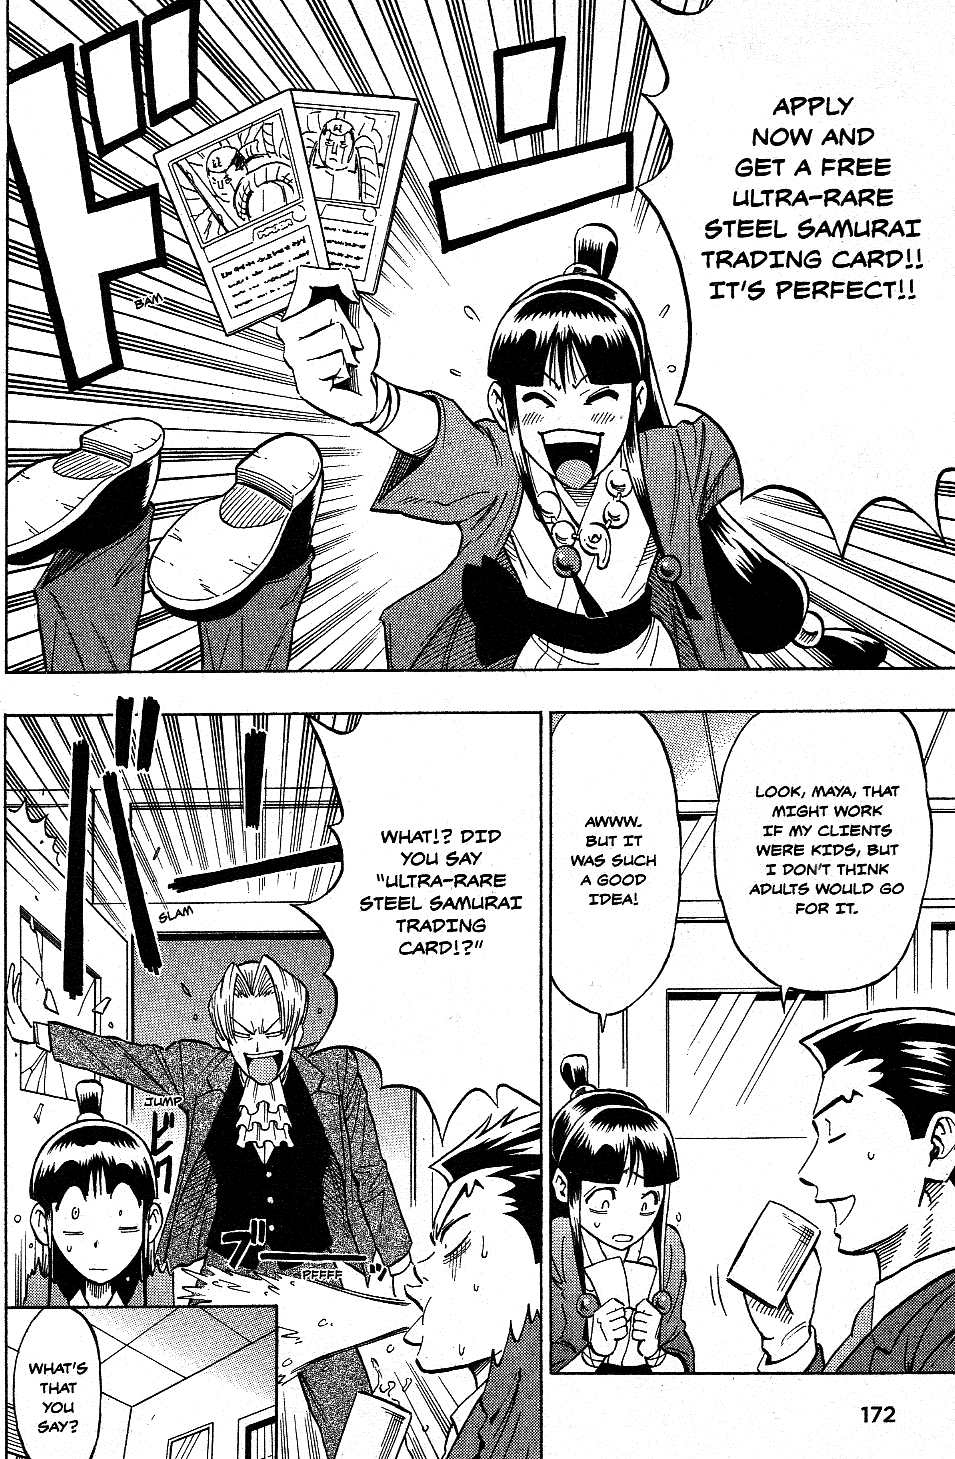 Phoenix Wright: Ace Attorney - Official Casebook Vol.1 Chapter 11: It’S Not Easy Being A Defence Lawyer - By Daigo - Picture 2